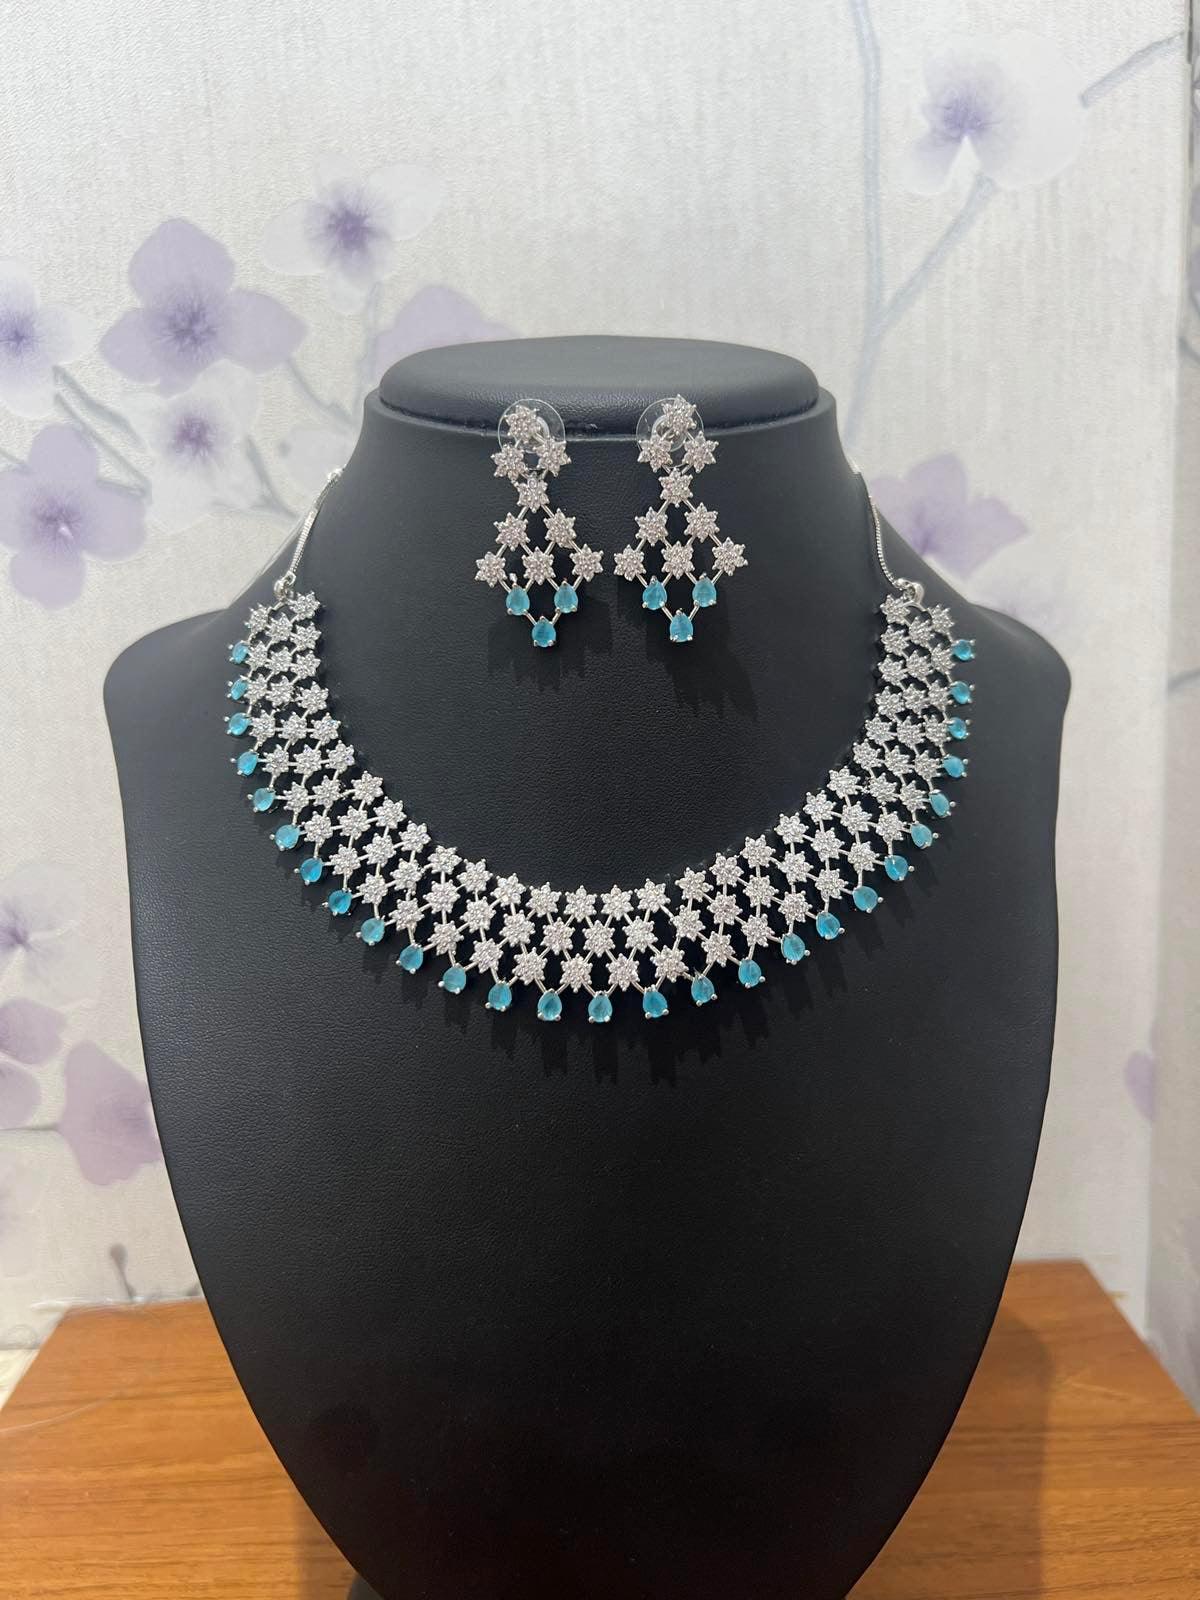 American Diamond Necklace Set with Sky Blue Stone - Boutique Nepal